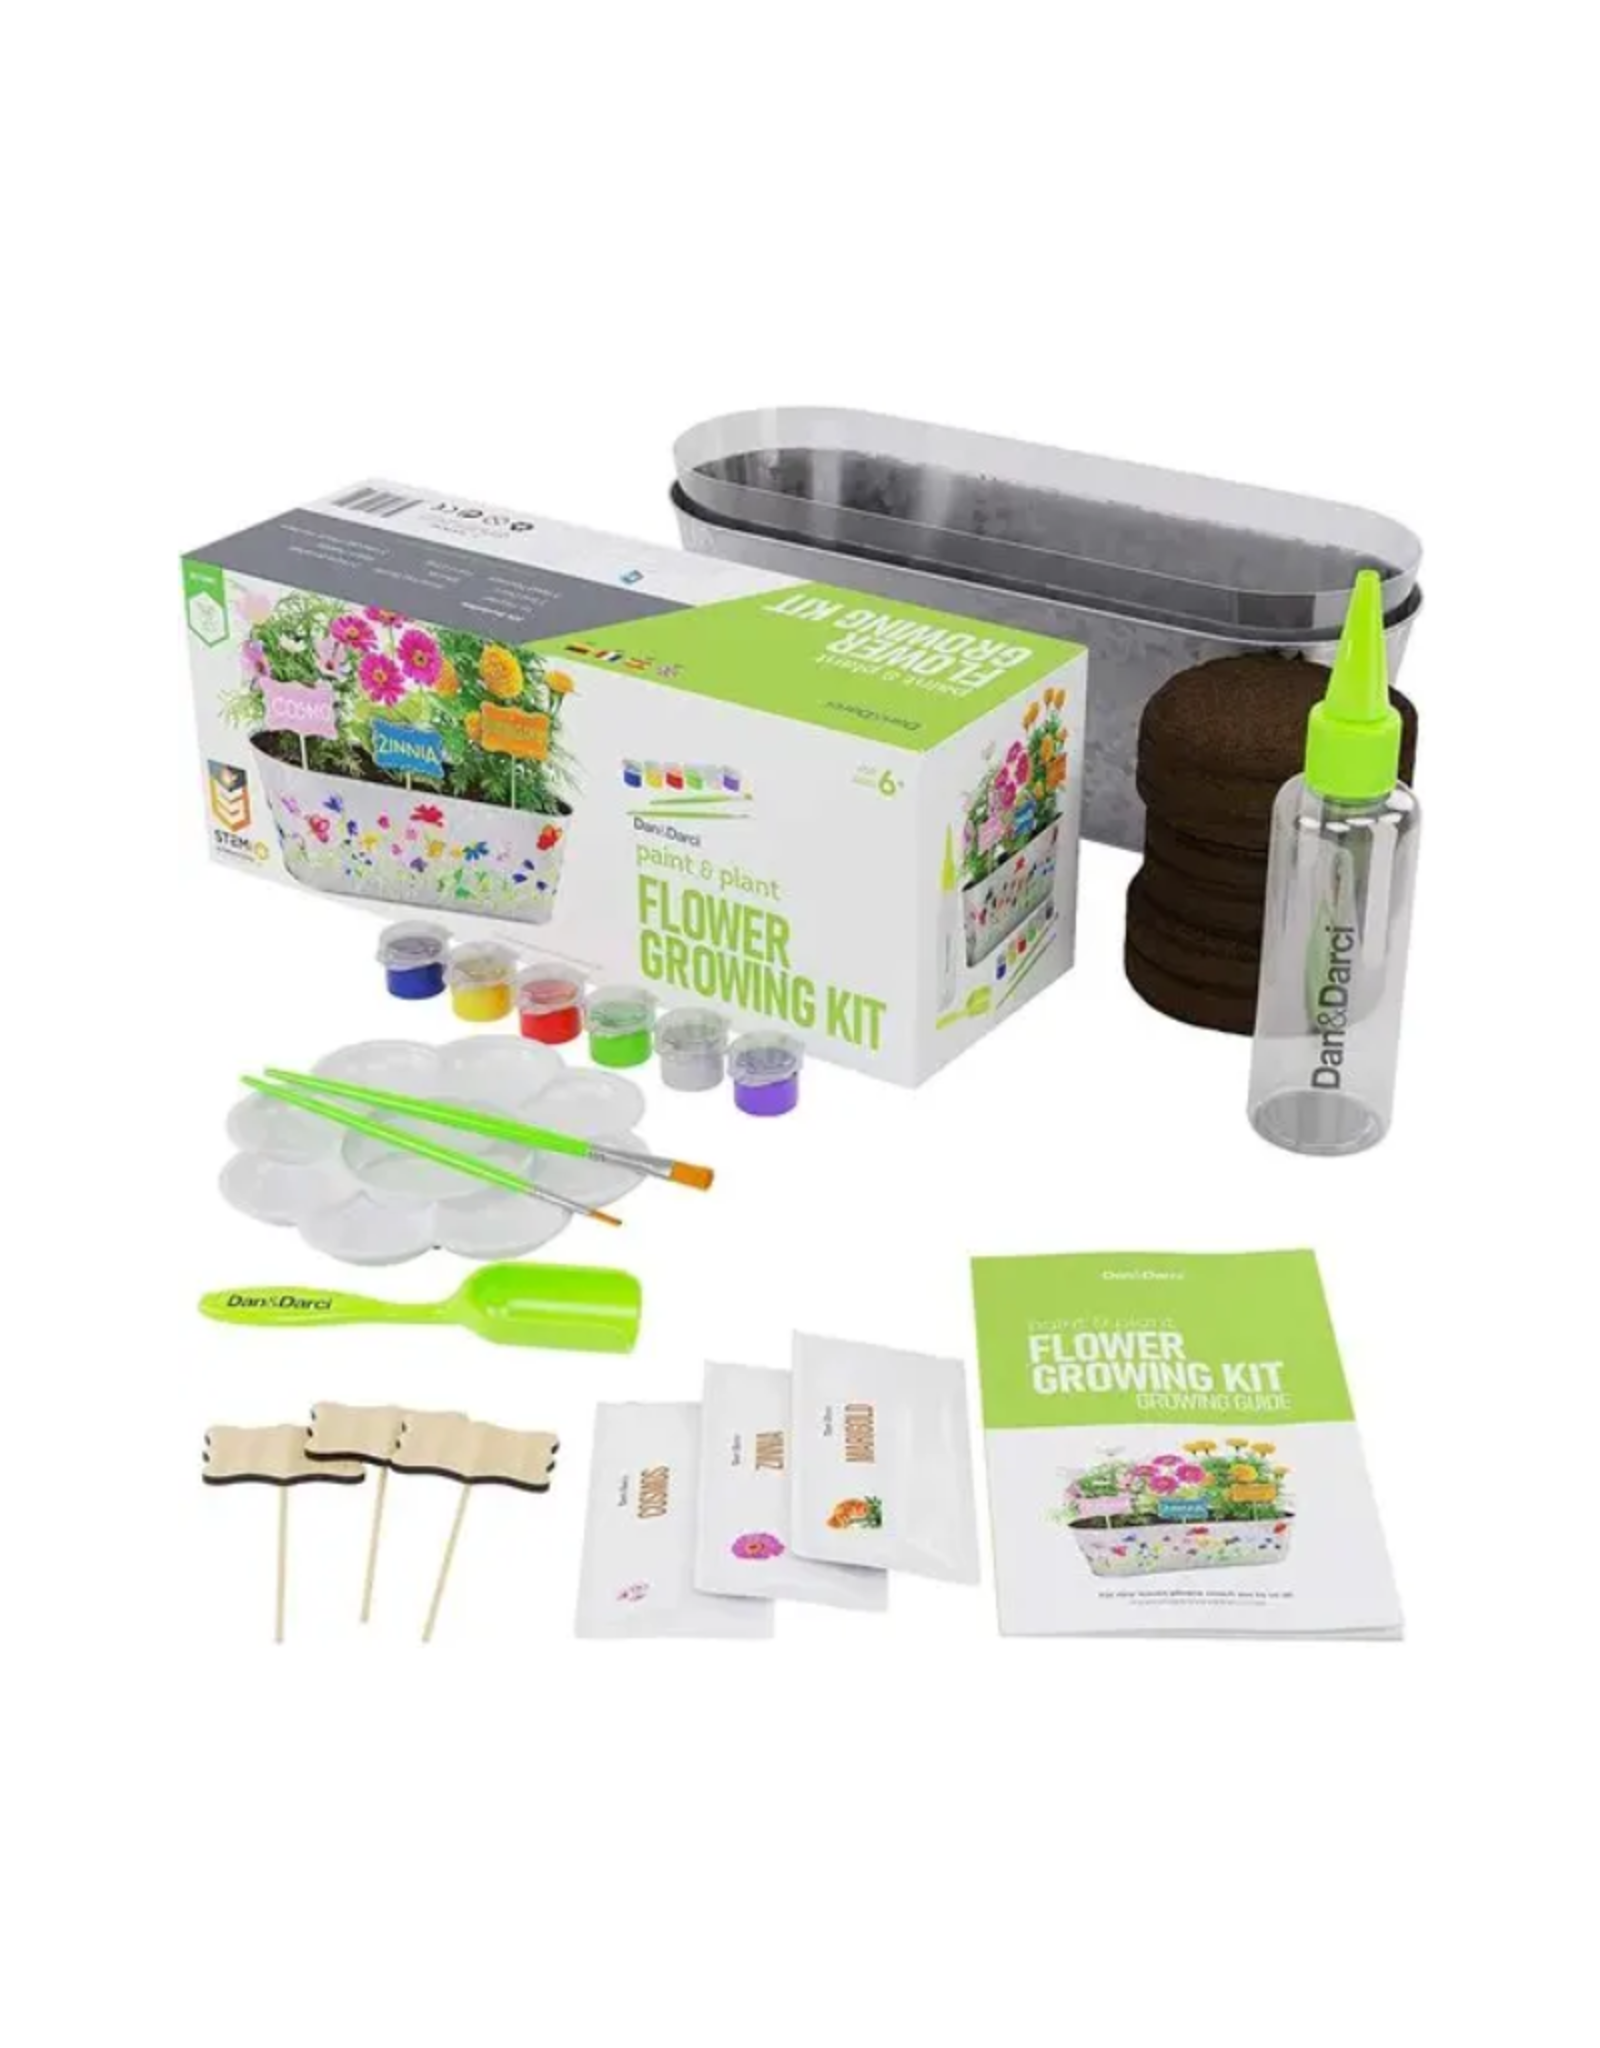 Paint And Plant Flower Growing Kit